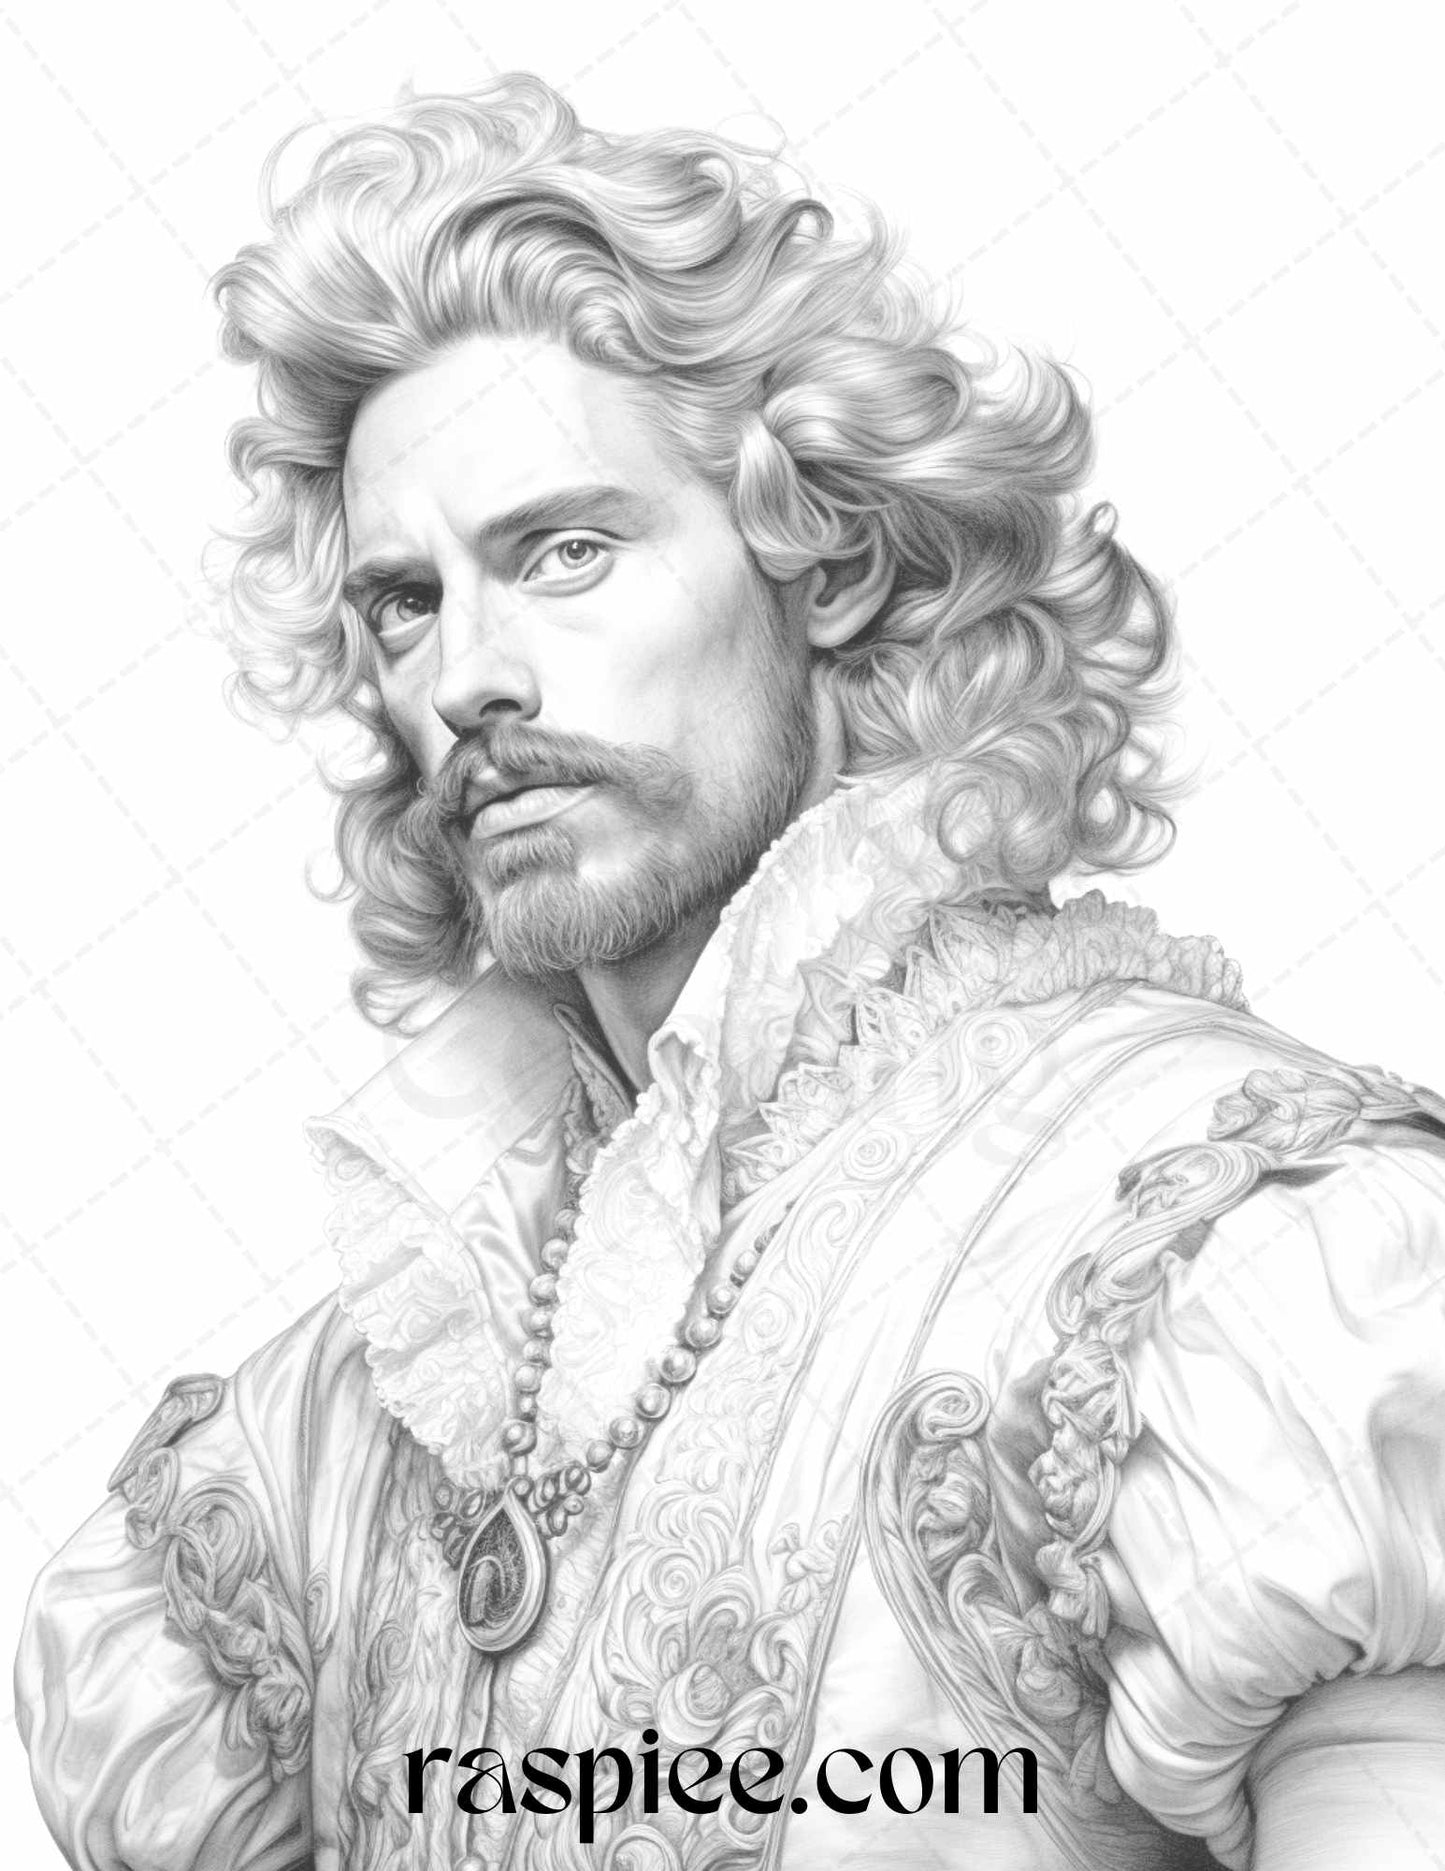 Baroque Man Portrait Grayscale Coloring Pages, Vintage Portraits Printable, High-Quality Grayscale Art, Adult Coloring Book Stress Relief, Intricate Baroque Designs